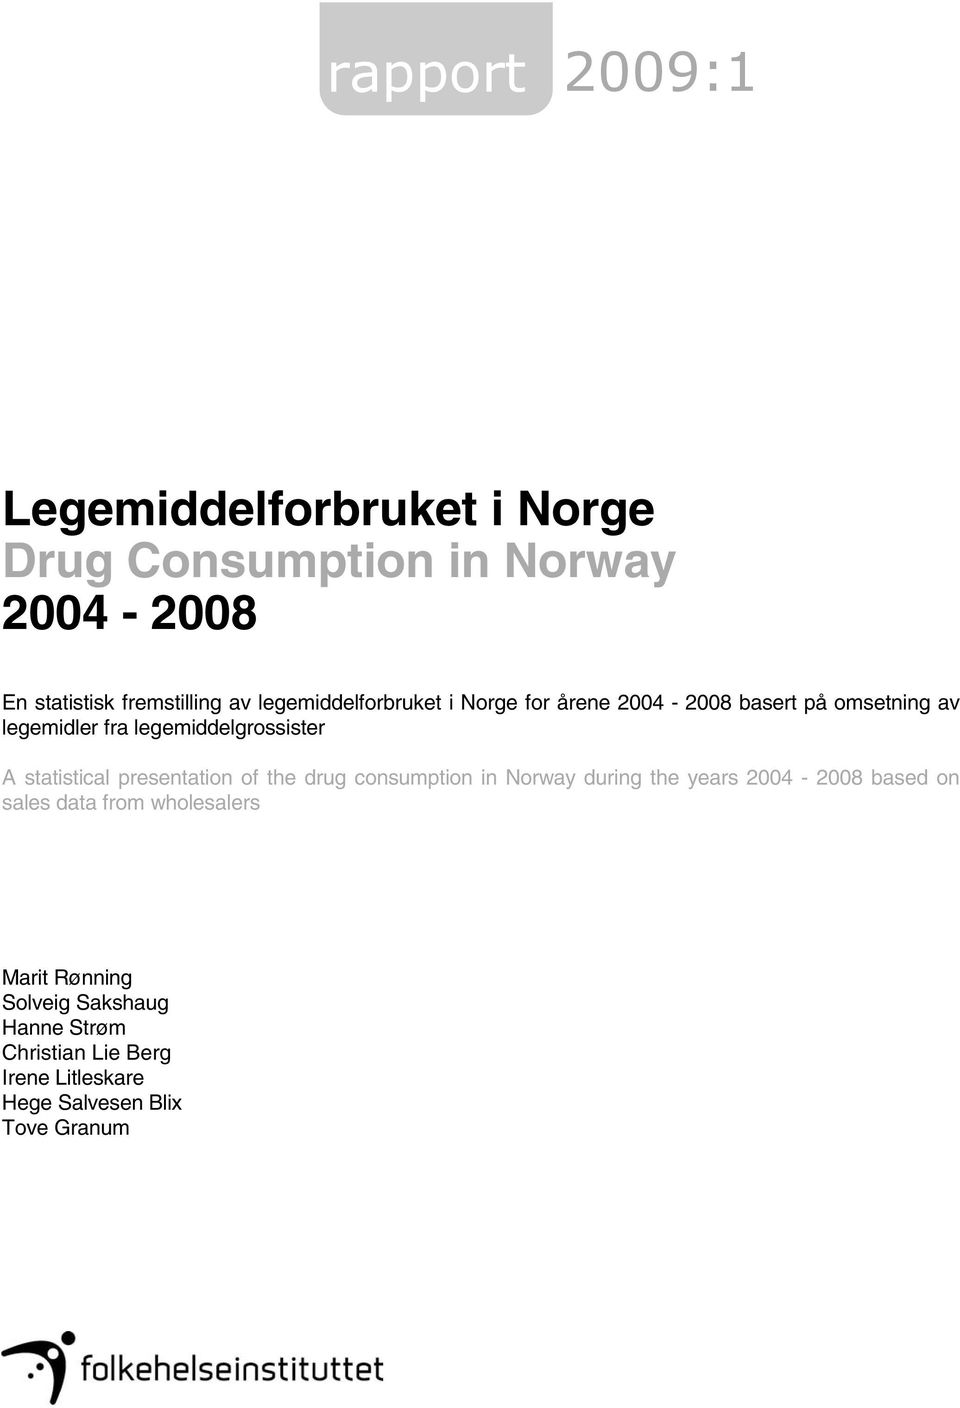 statistical presentation of the drug consumption in Norway during the years 2004-2008 based on sales data from